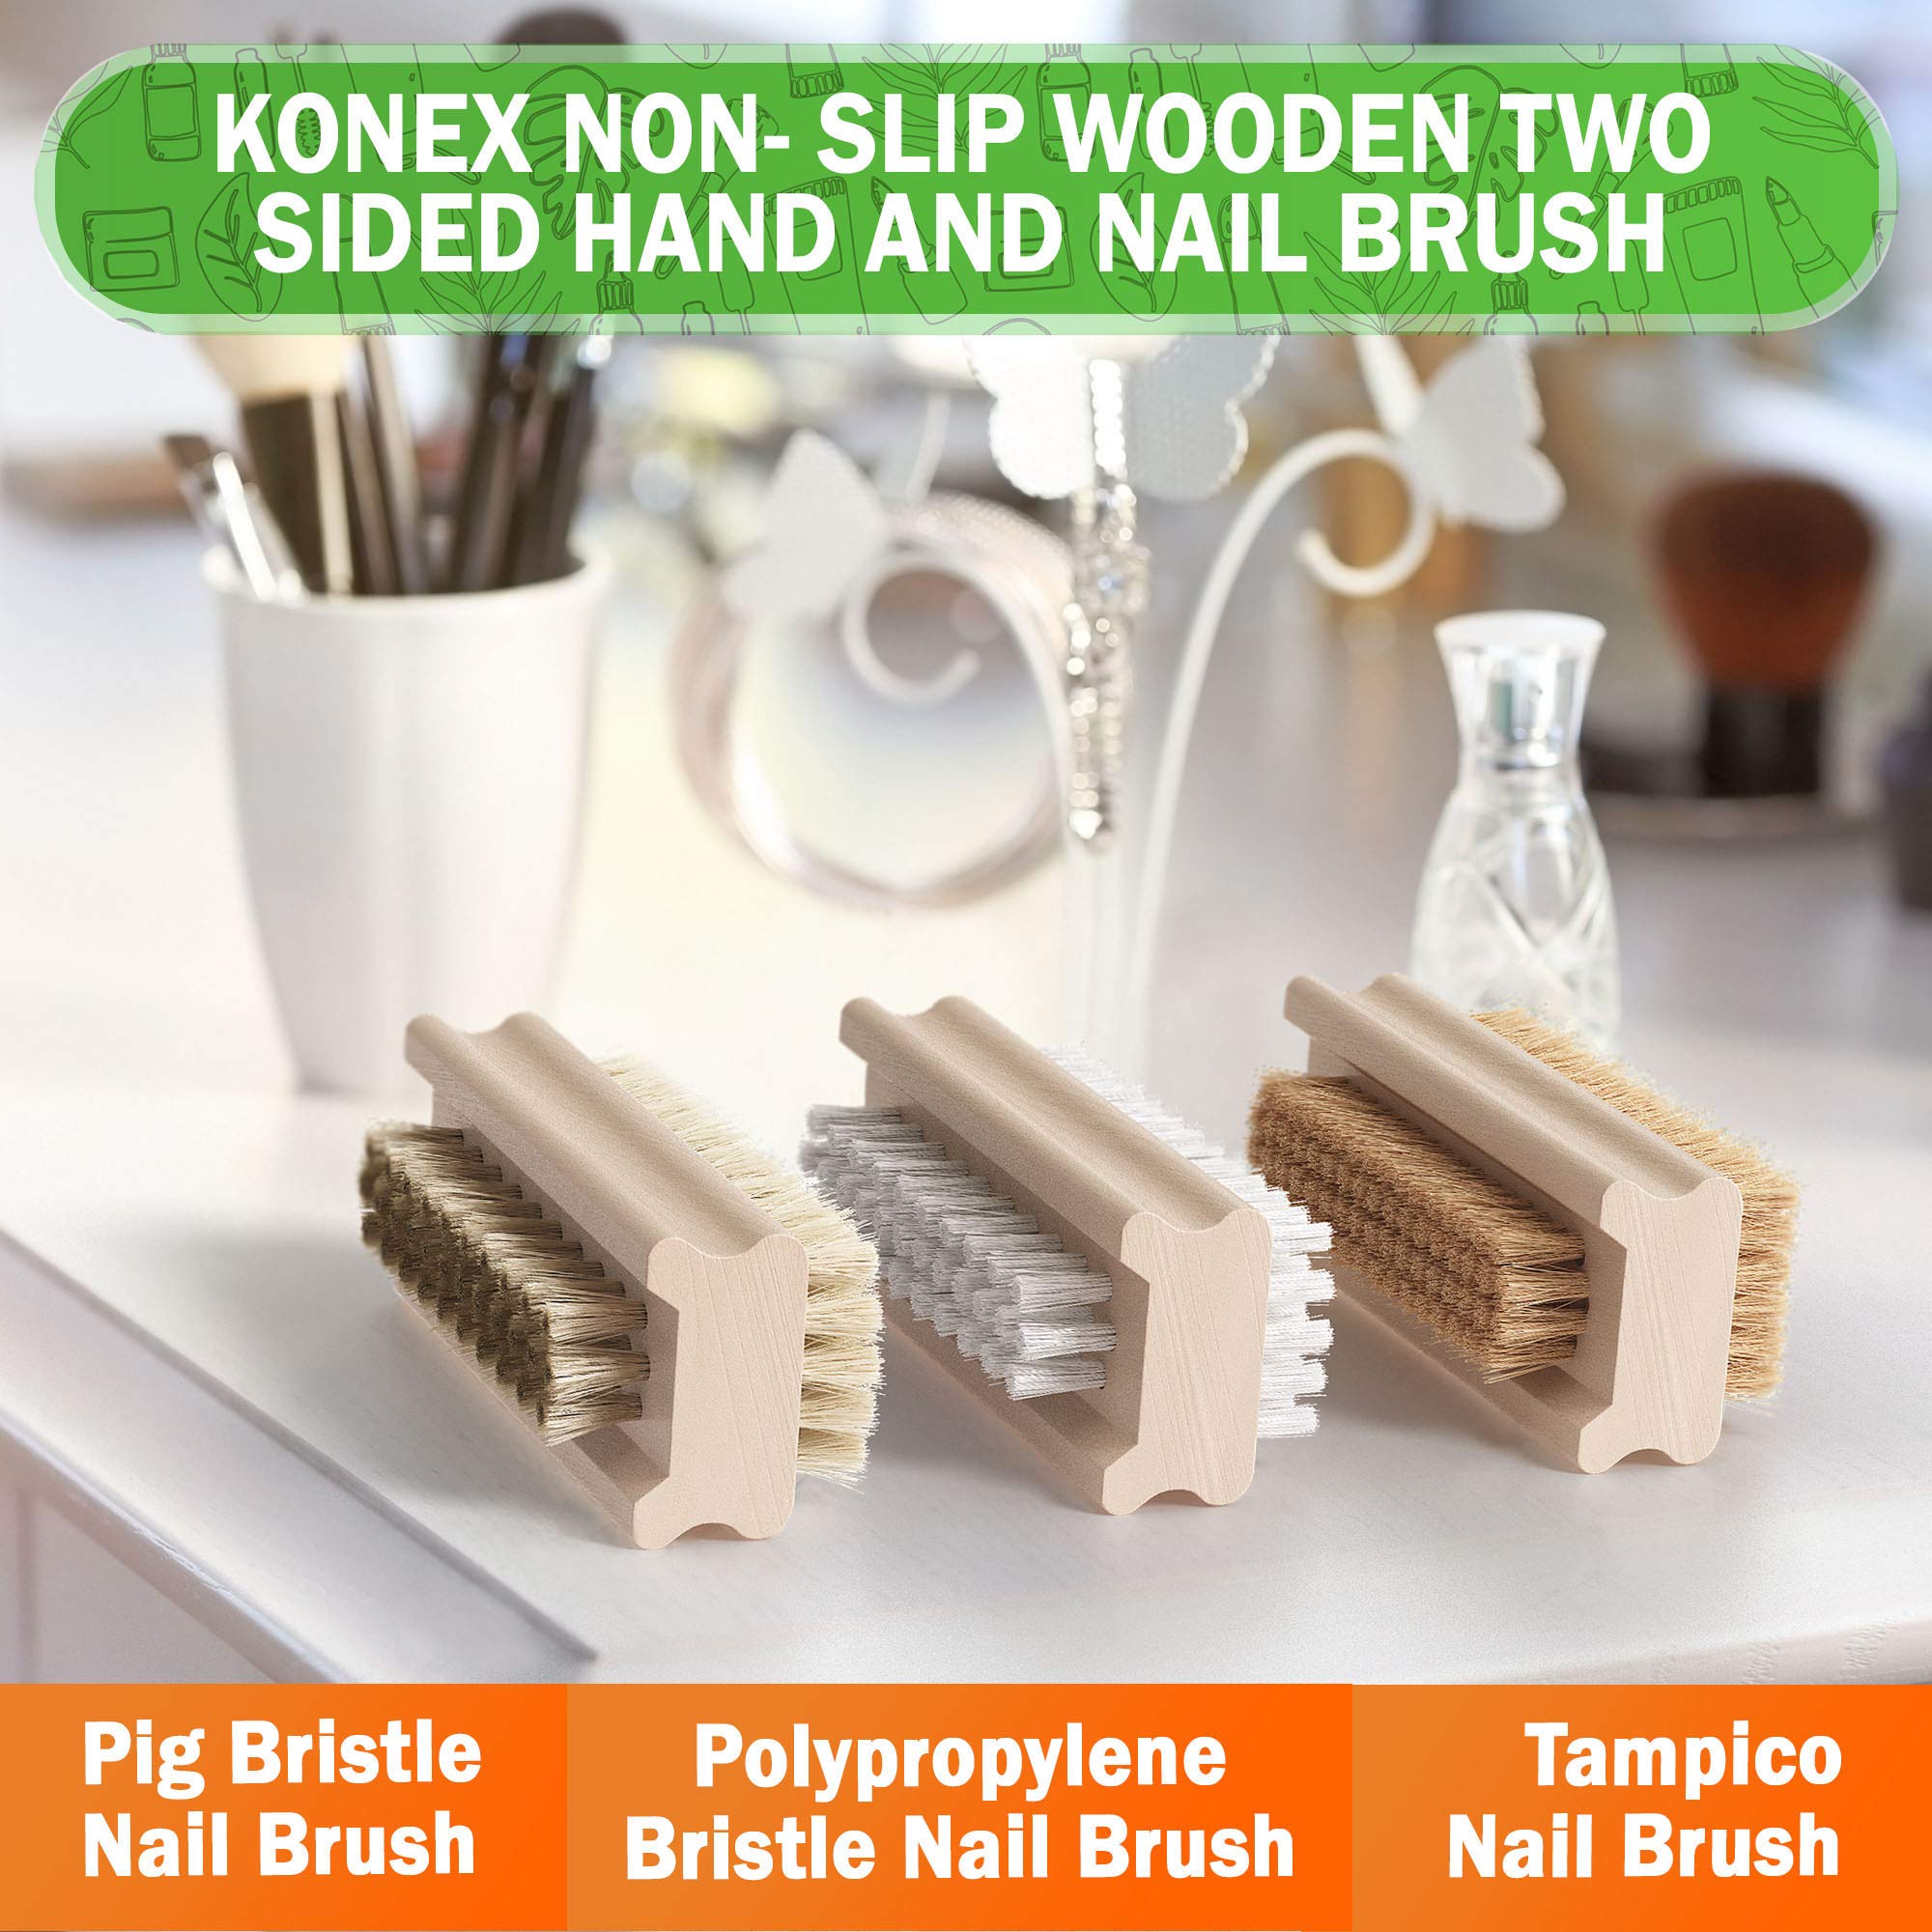 Konex Non-Slip Wooden Two-sided Hand and Nail Brush. Fingernail Brush for Nail Cleaning and Scrubbing. Heavy duty Stiff Nail Brush for Travel. Mechanic hand scrub brush with molded grip.